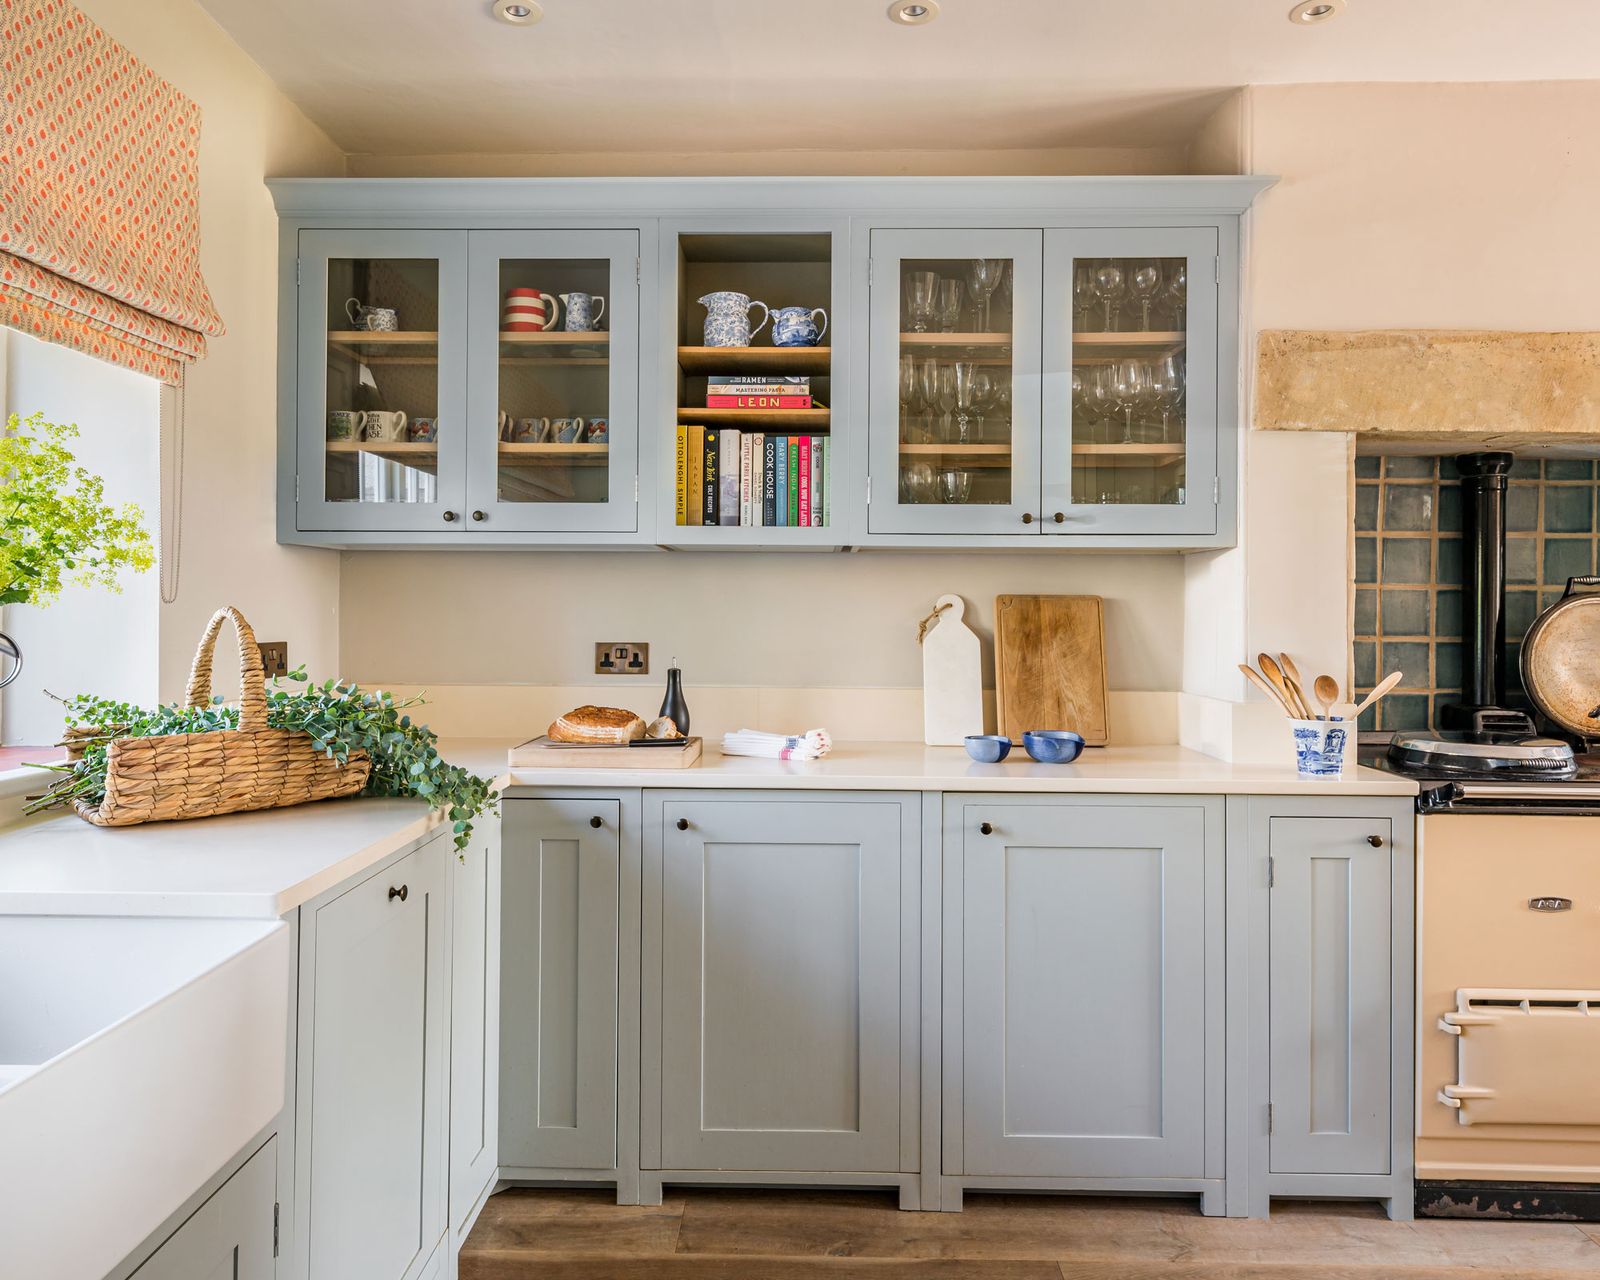 This Northumbrian coastal cottage has a beautiful interior | Homes ...